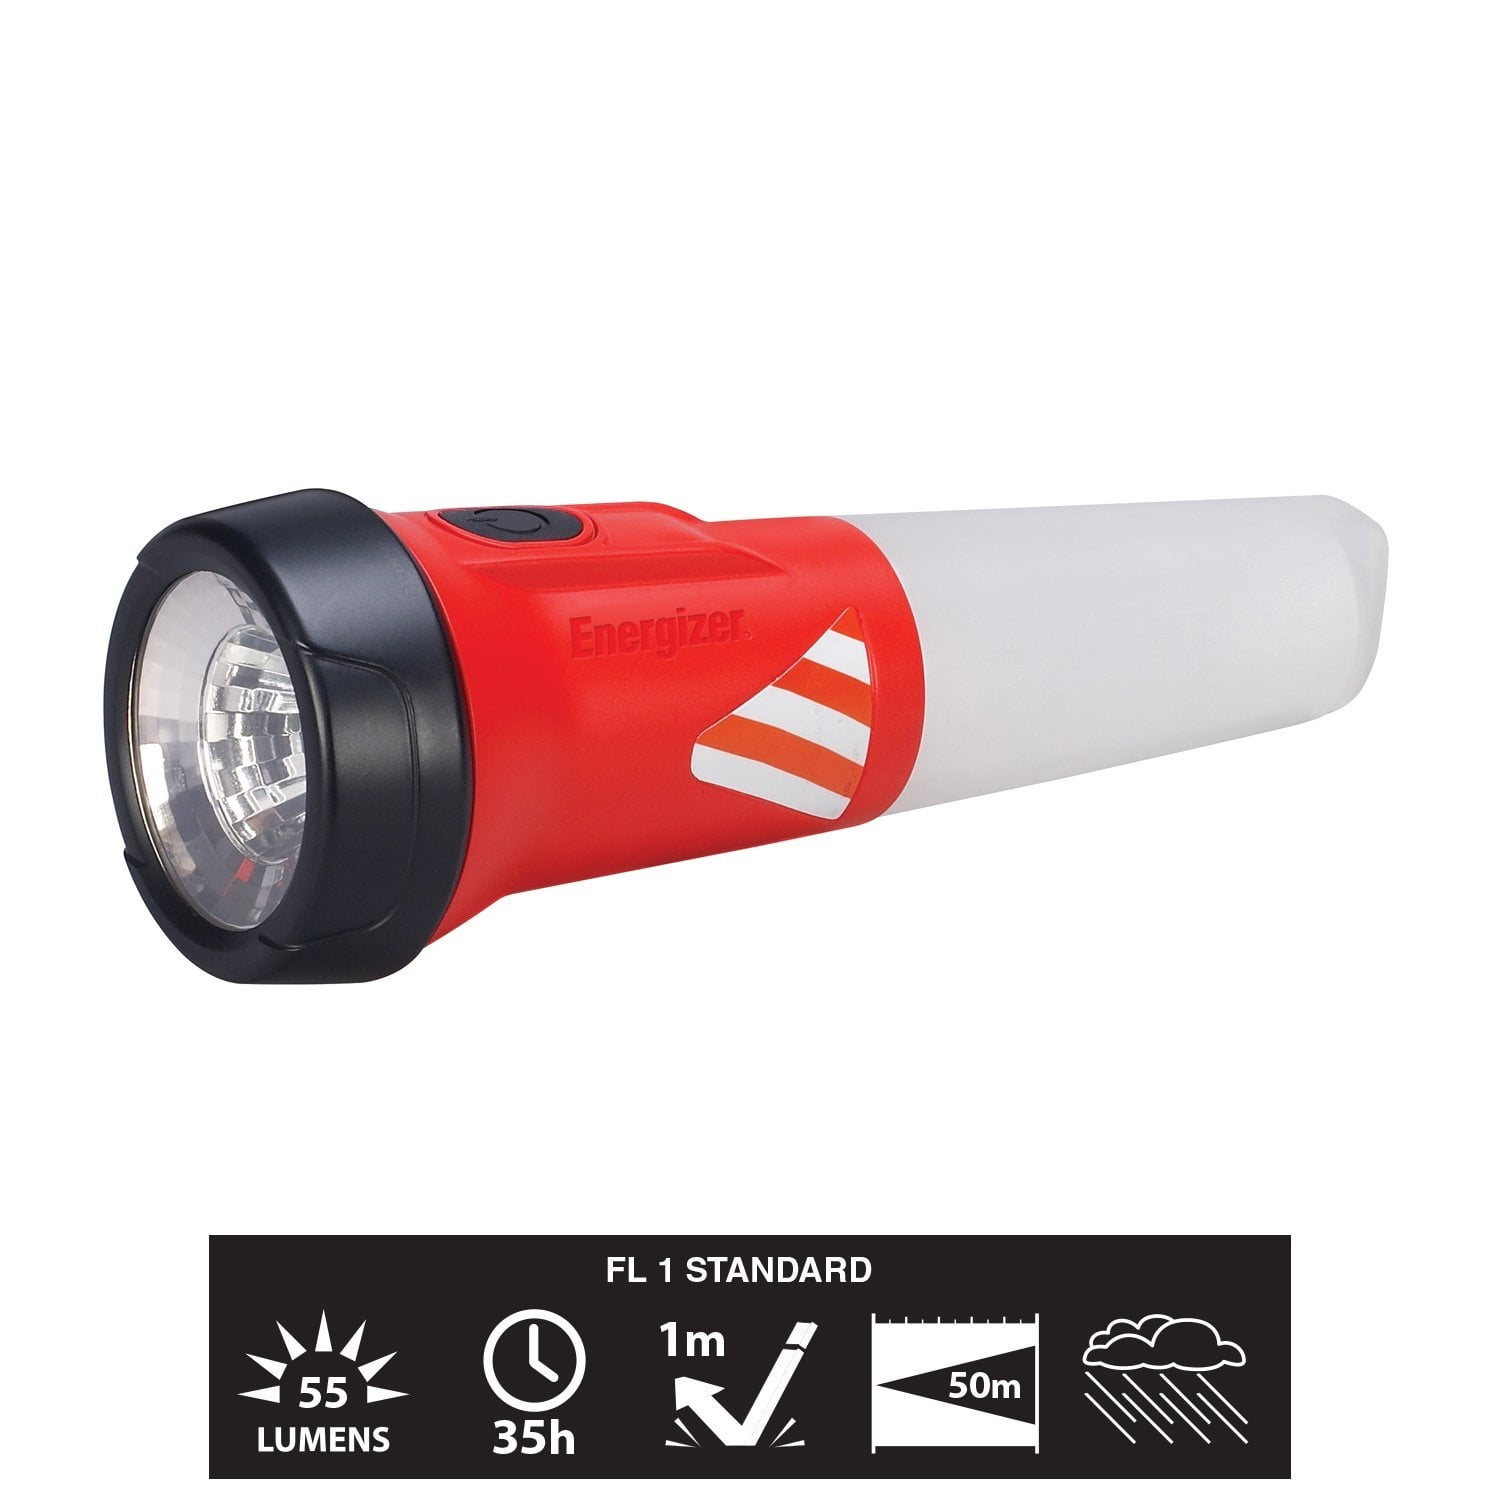 Compact & Water-Resistant 2-in-1 Light Energizer LED AA Flashlight and Lantern 